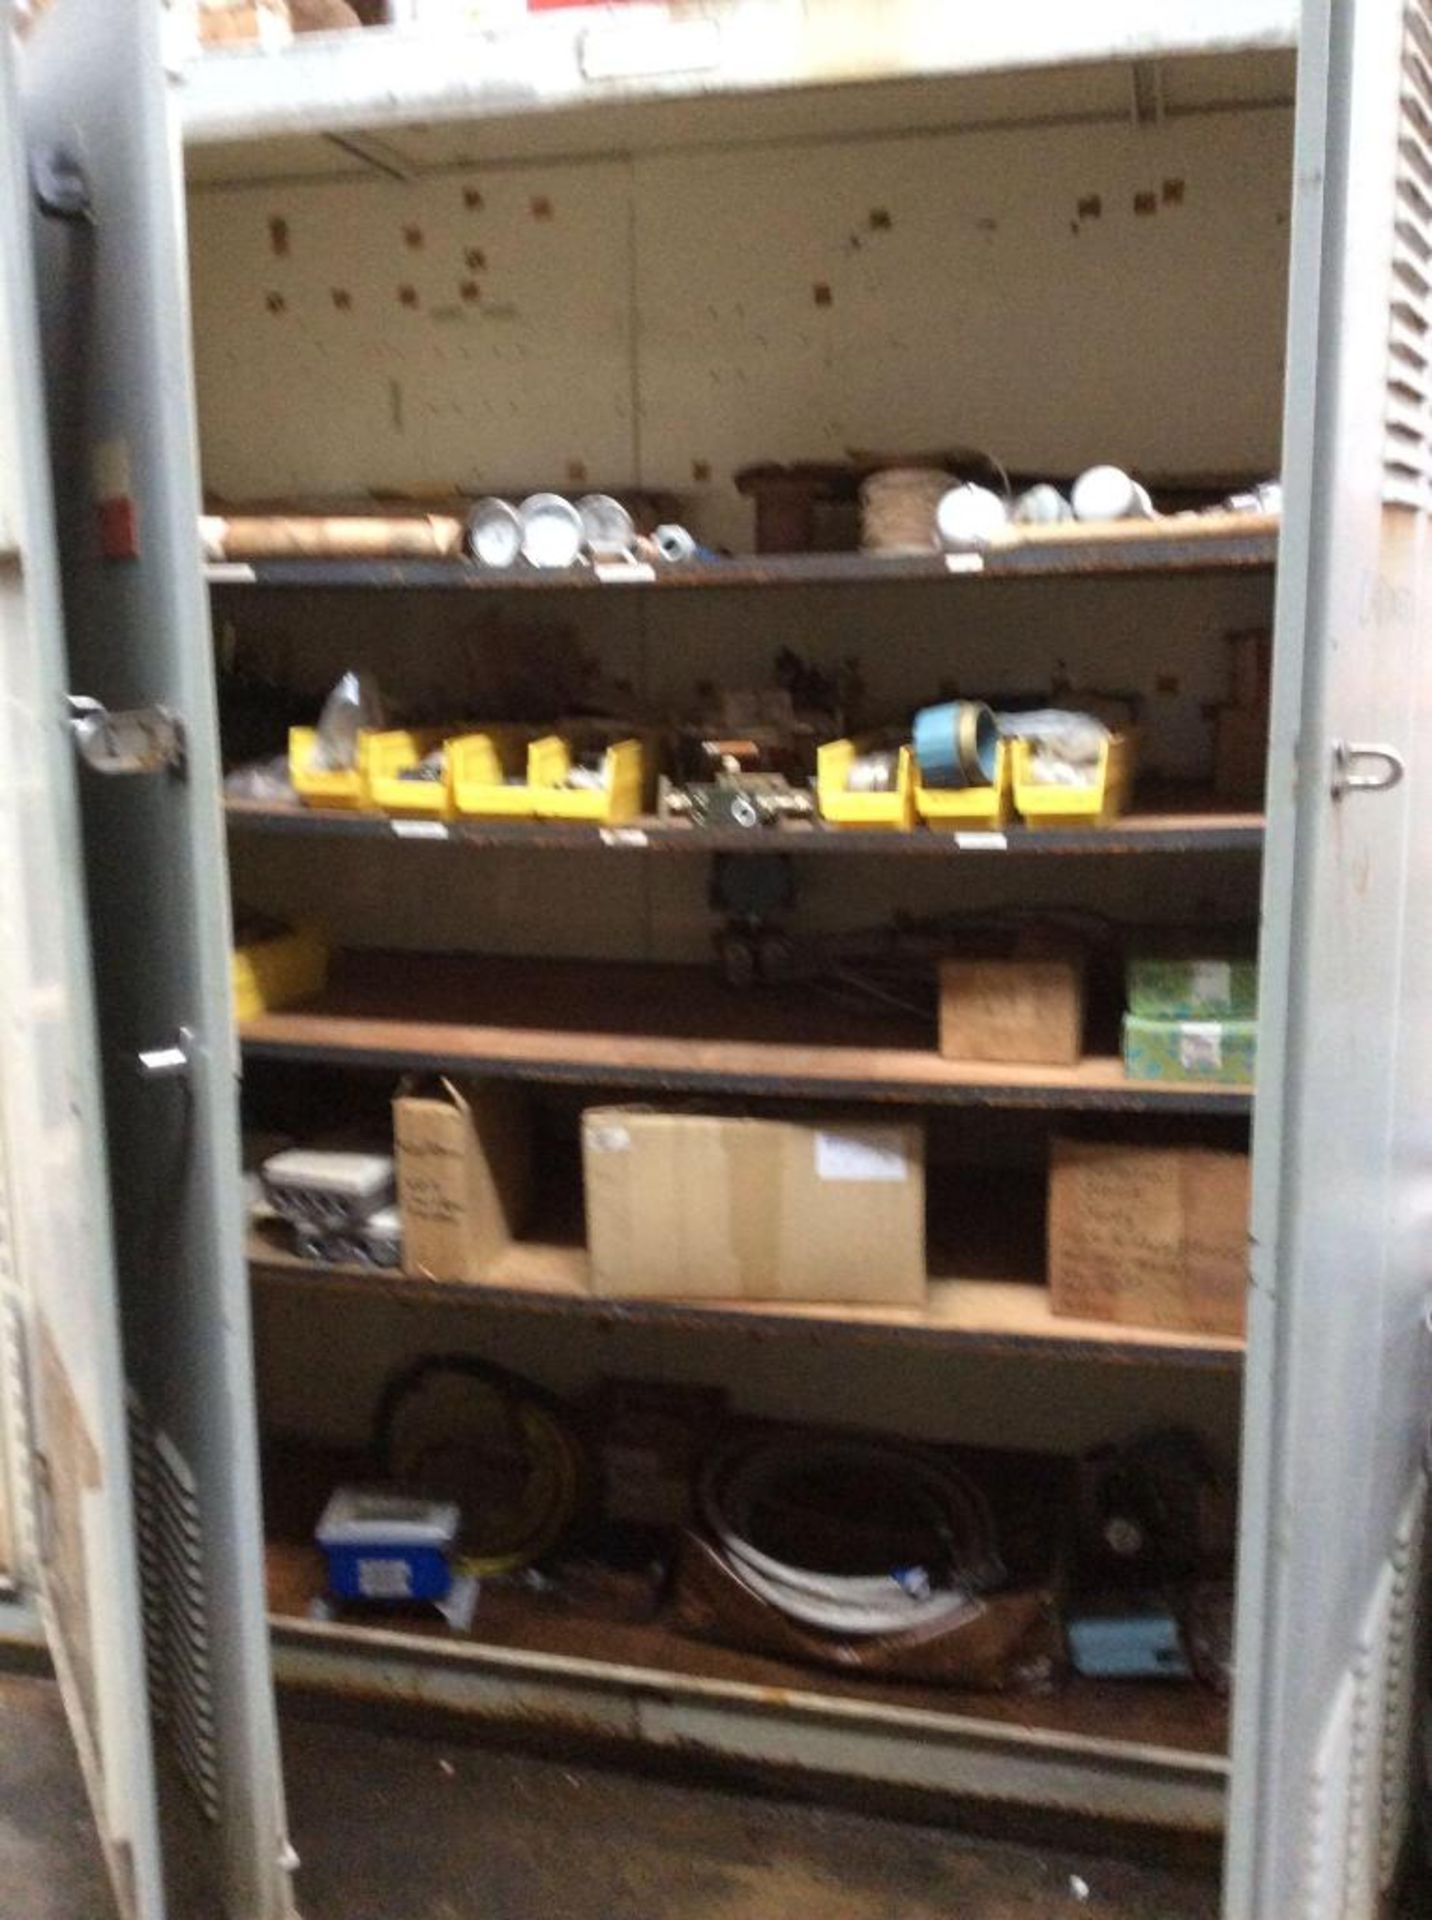 Lot of asst. parts and electrical components CONTENTS OF SHELVING AND RACKING IN CAGE - Image 2 of 7